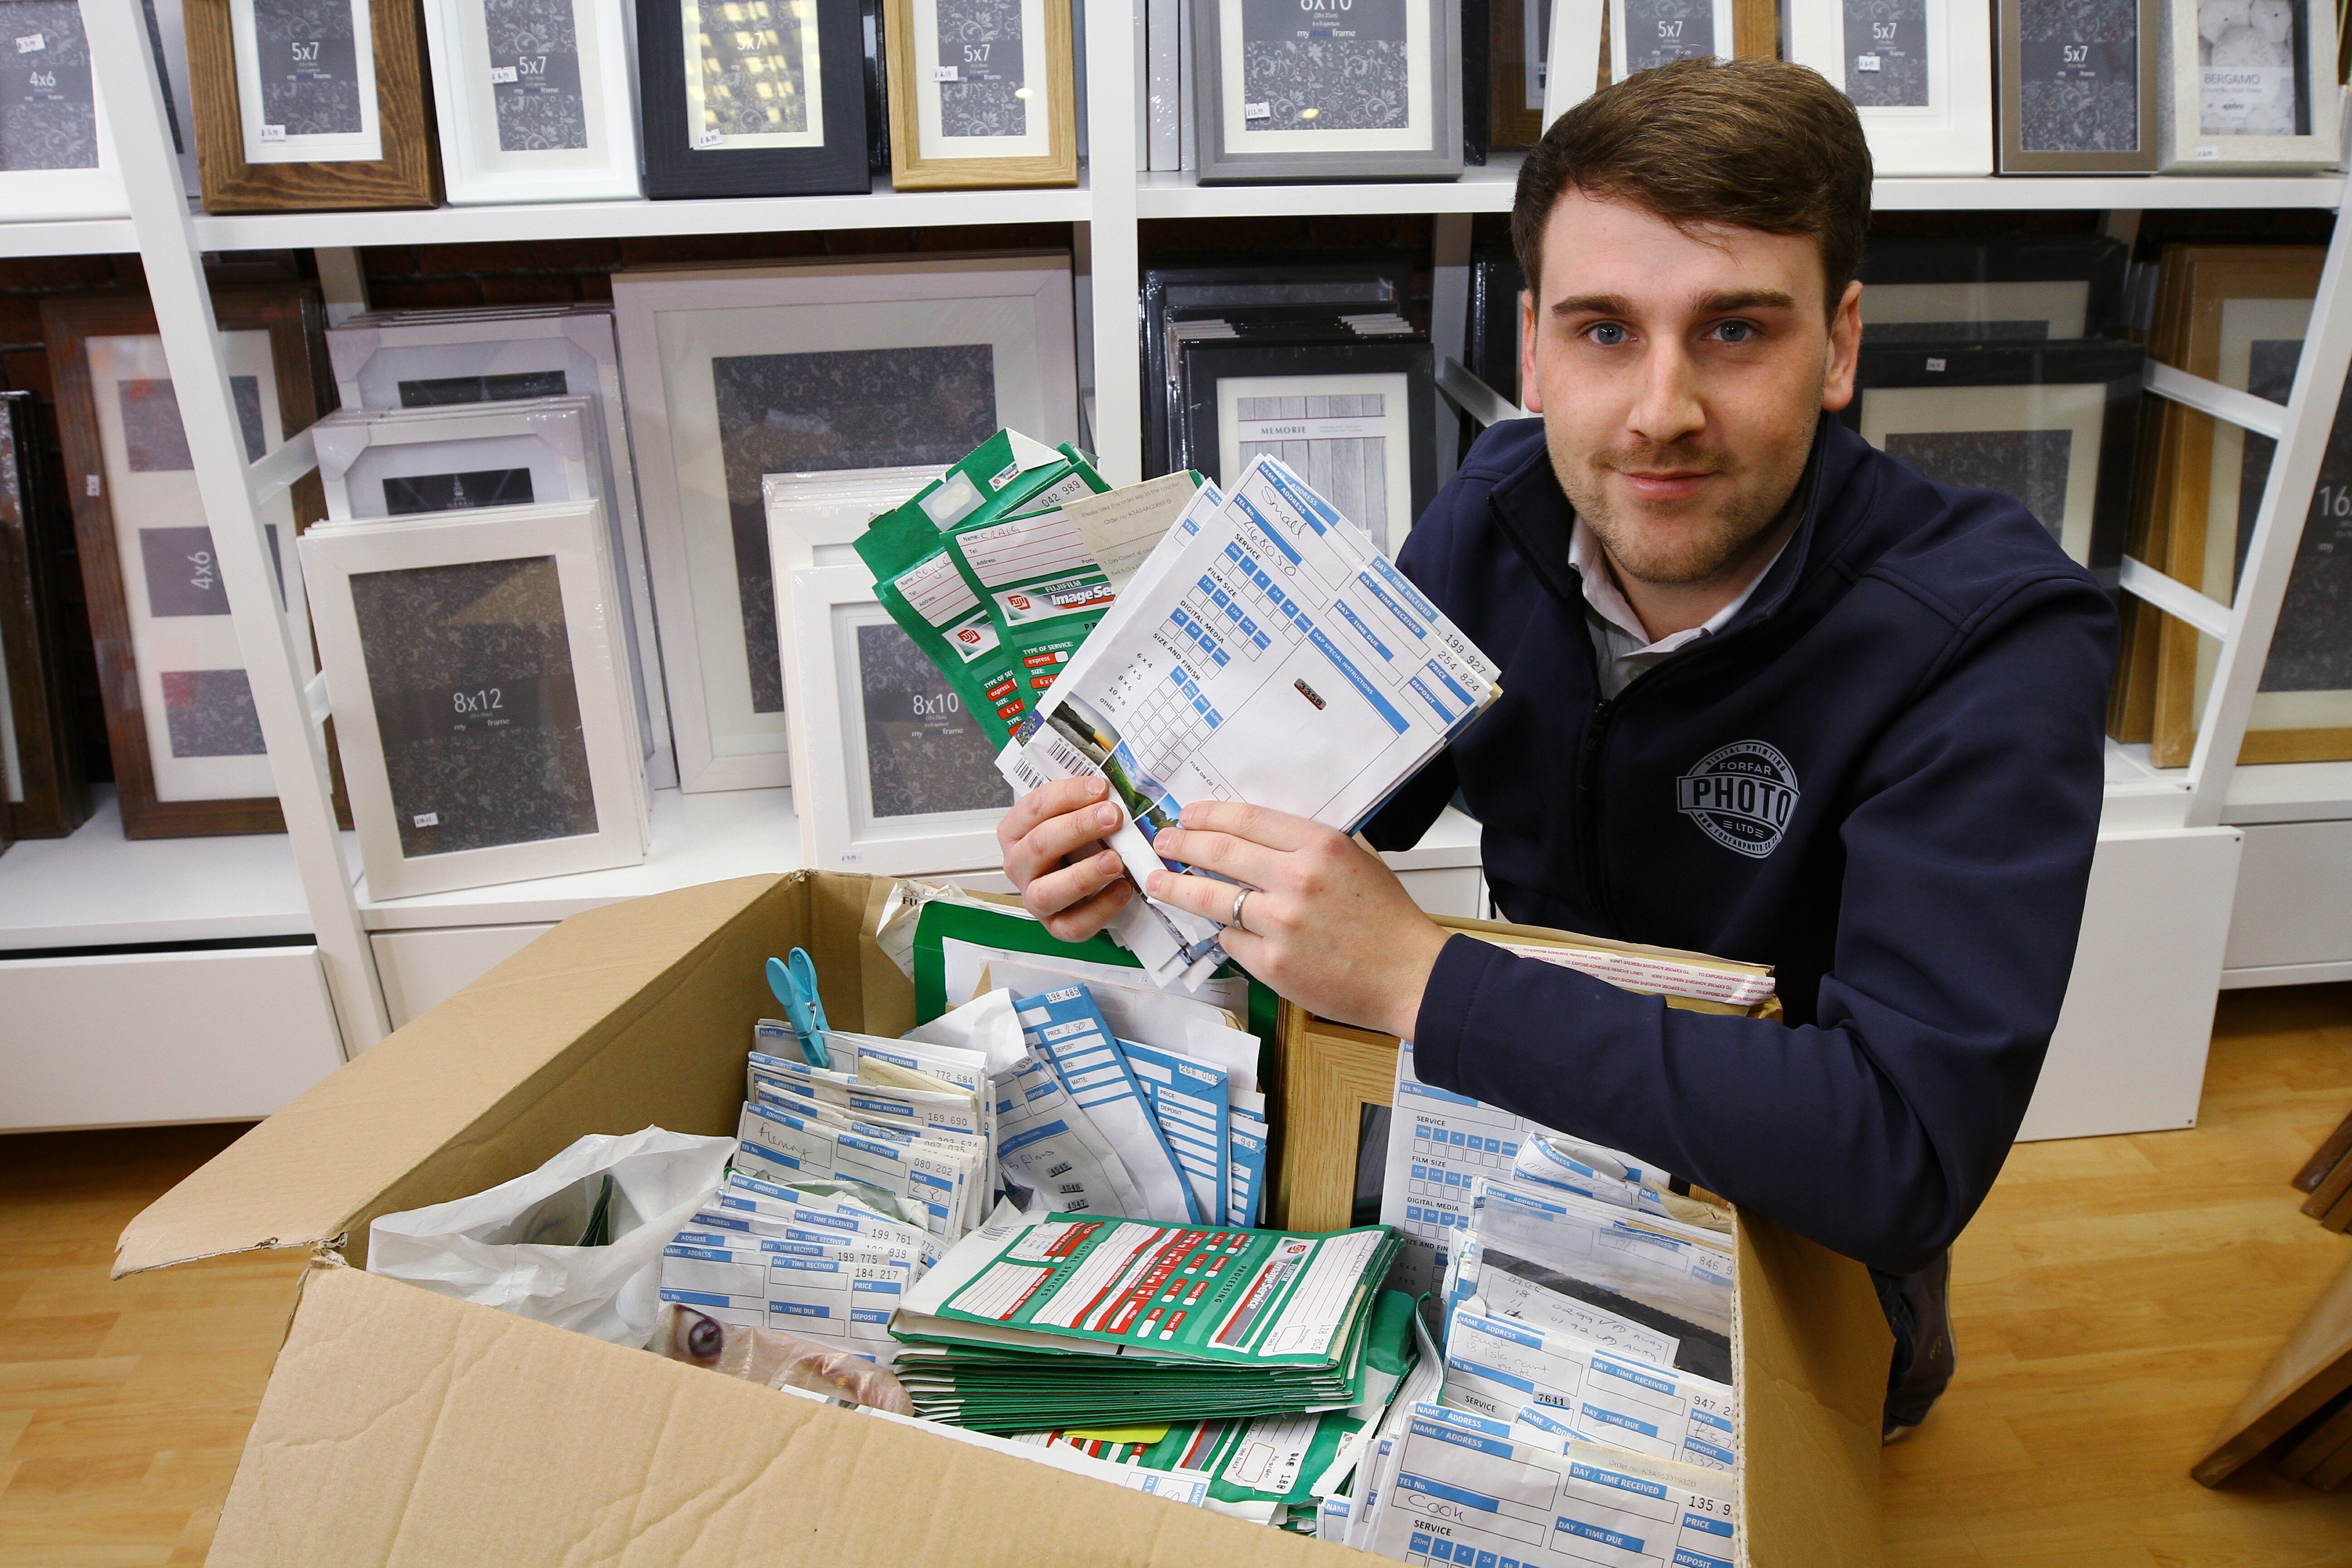 Chris Simpson has dozens of unclaimed photo orders in his Forfar shop